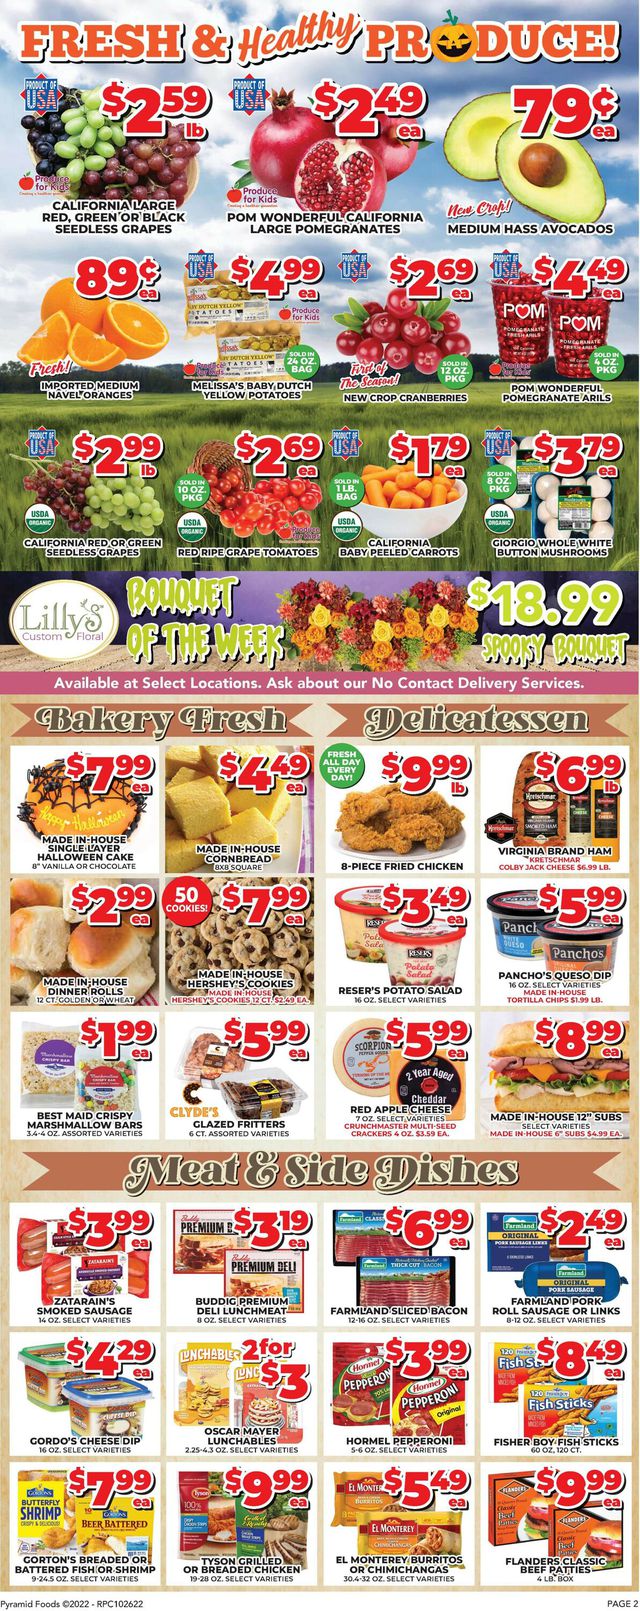 Price Cutter Ad from 10/26/2022